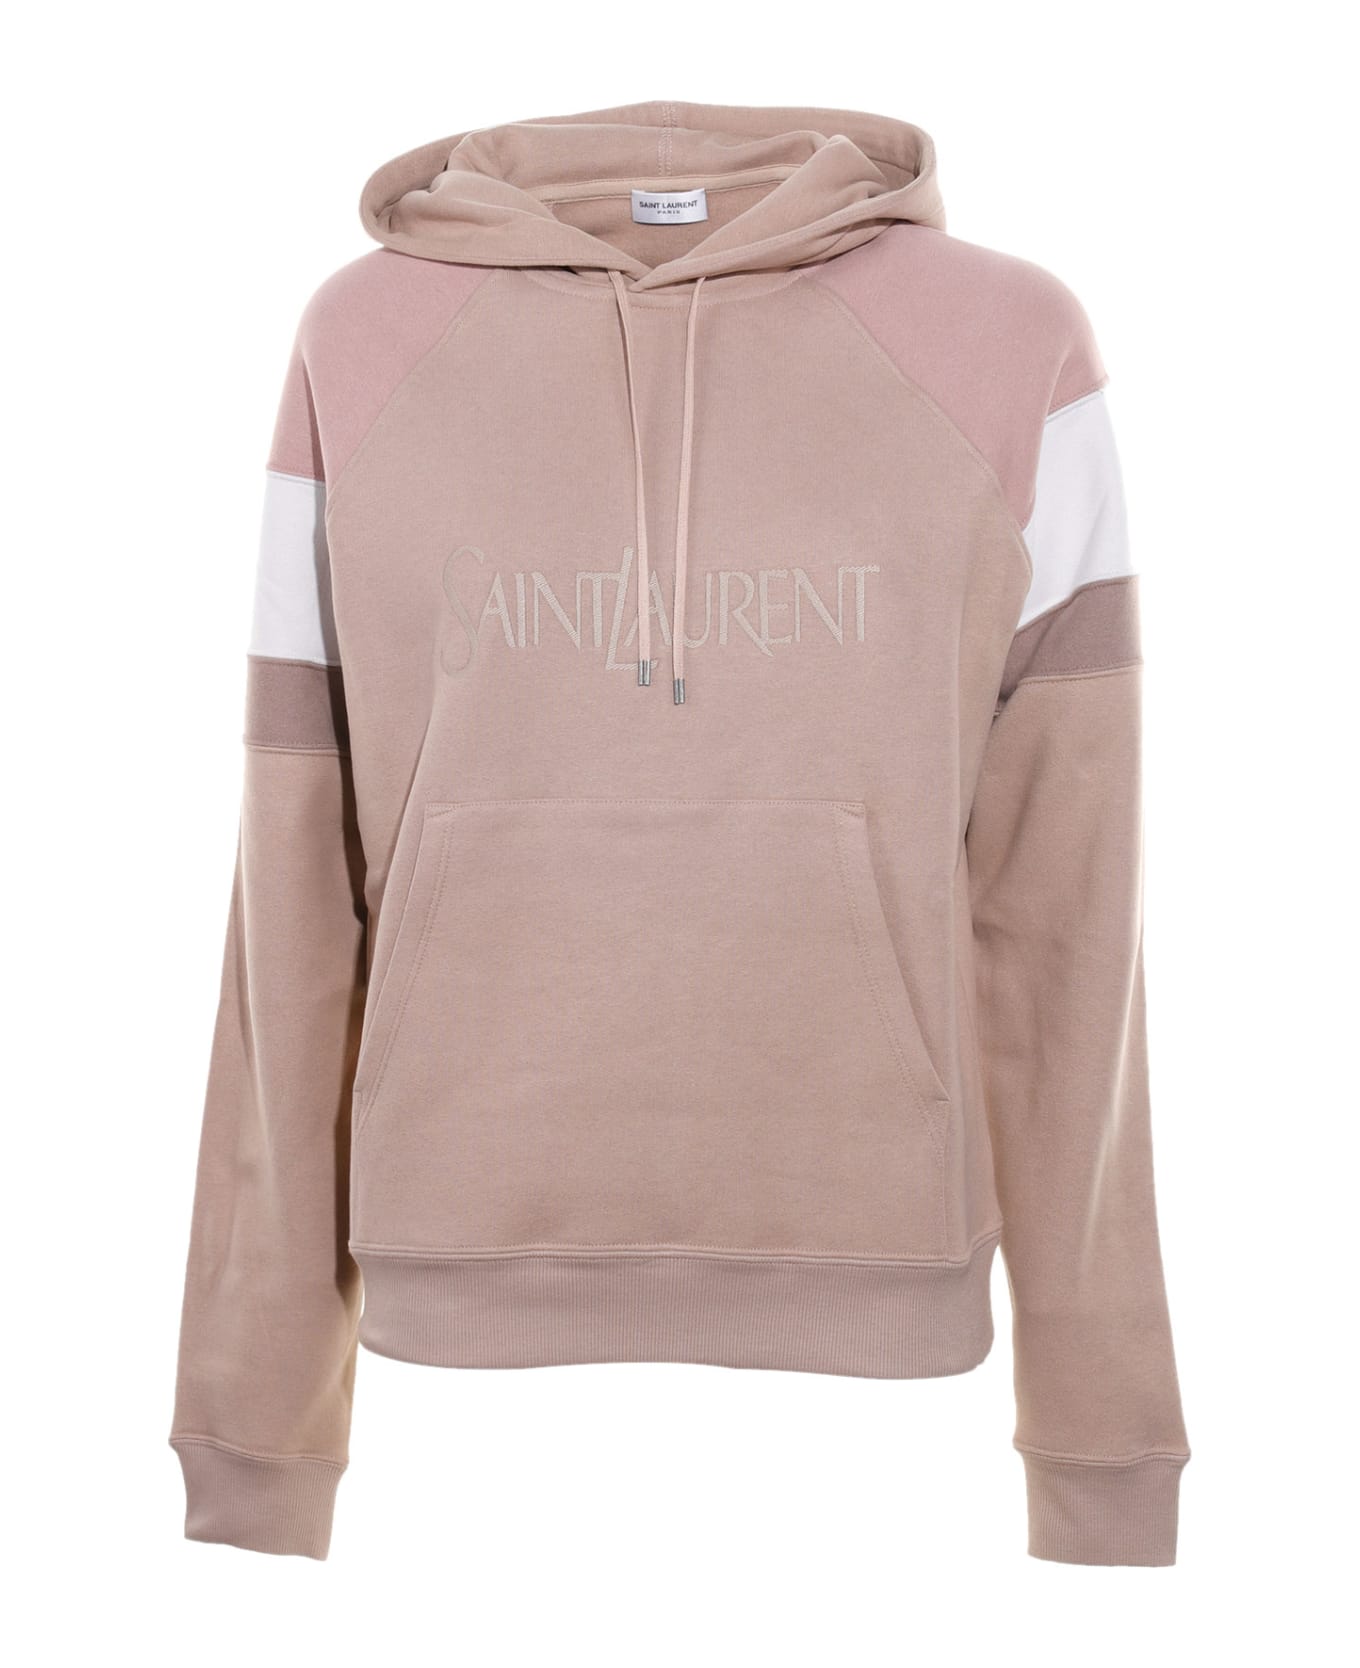 Saint Laurent Sweatshirt With Hood And Embroidered Logo - NUDE ROSE フリース